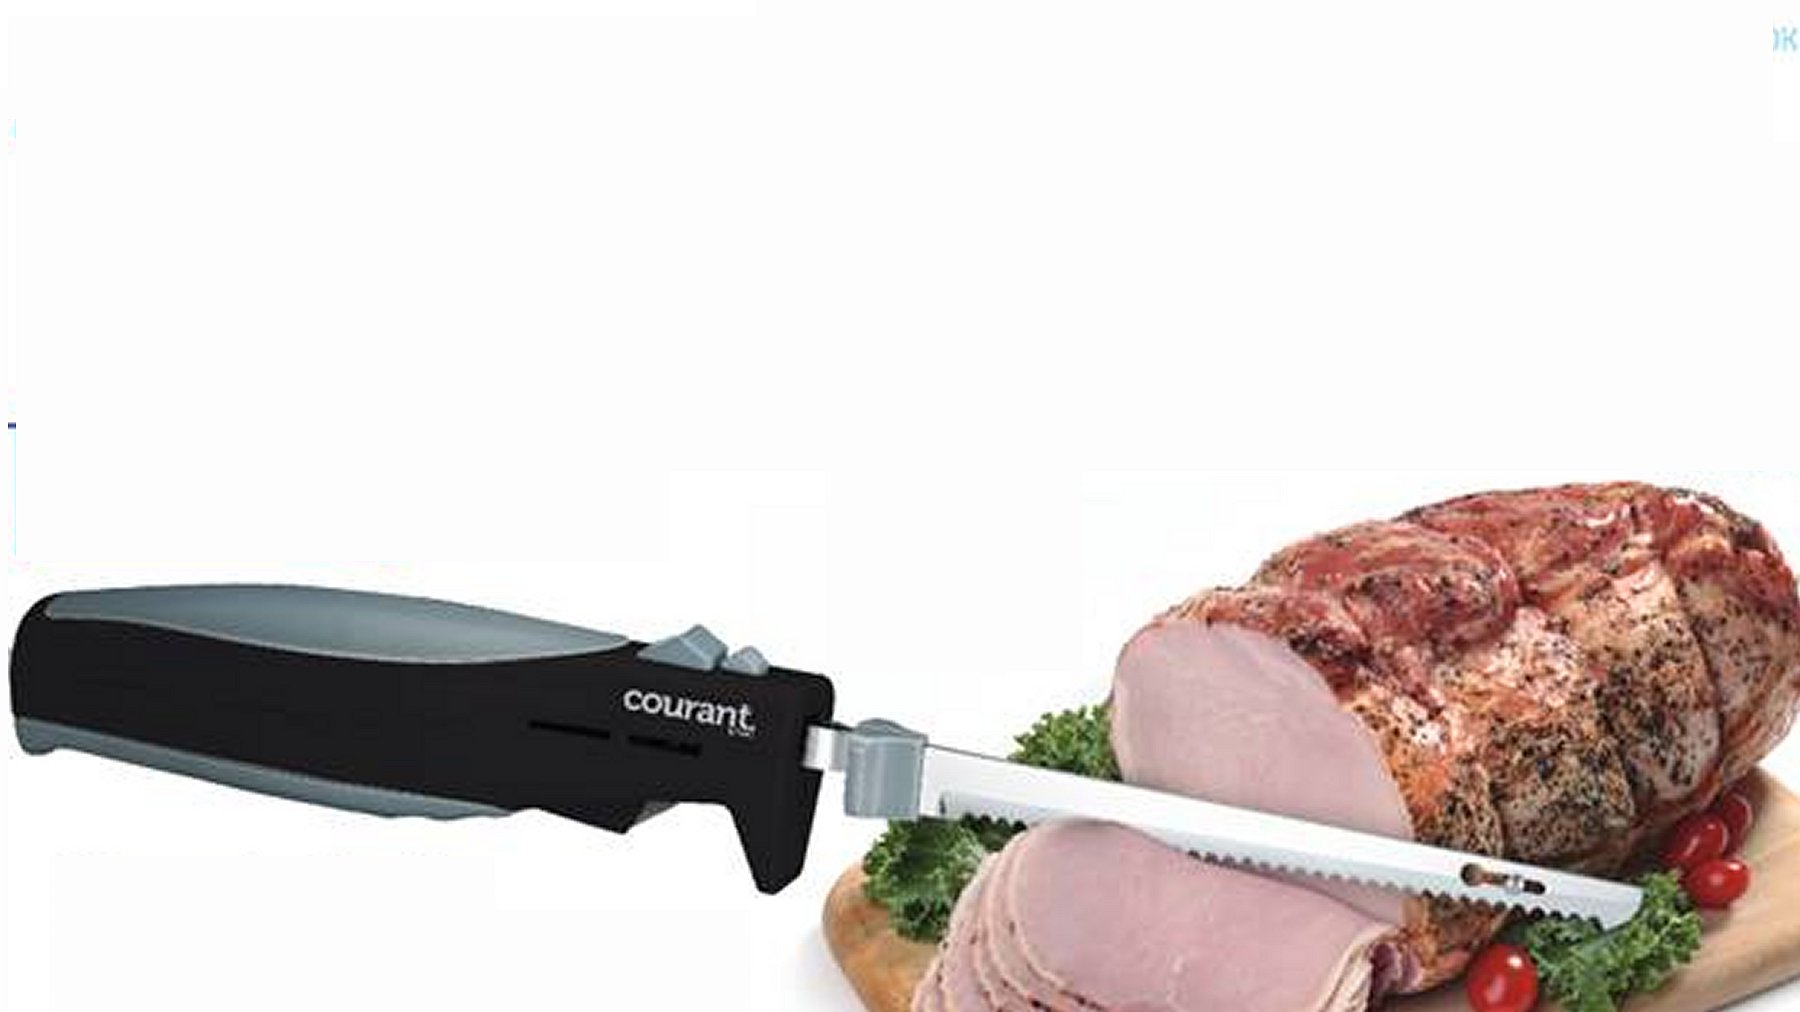 Courant Electric Knife, Black